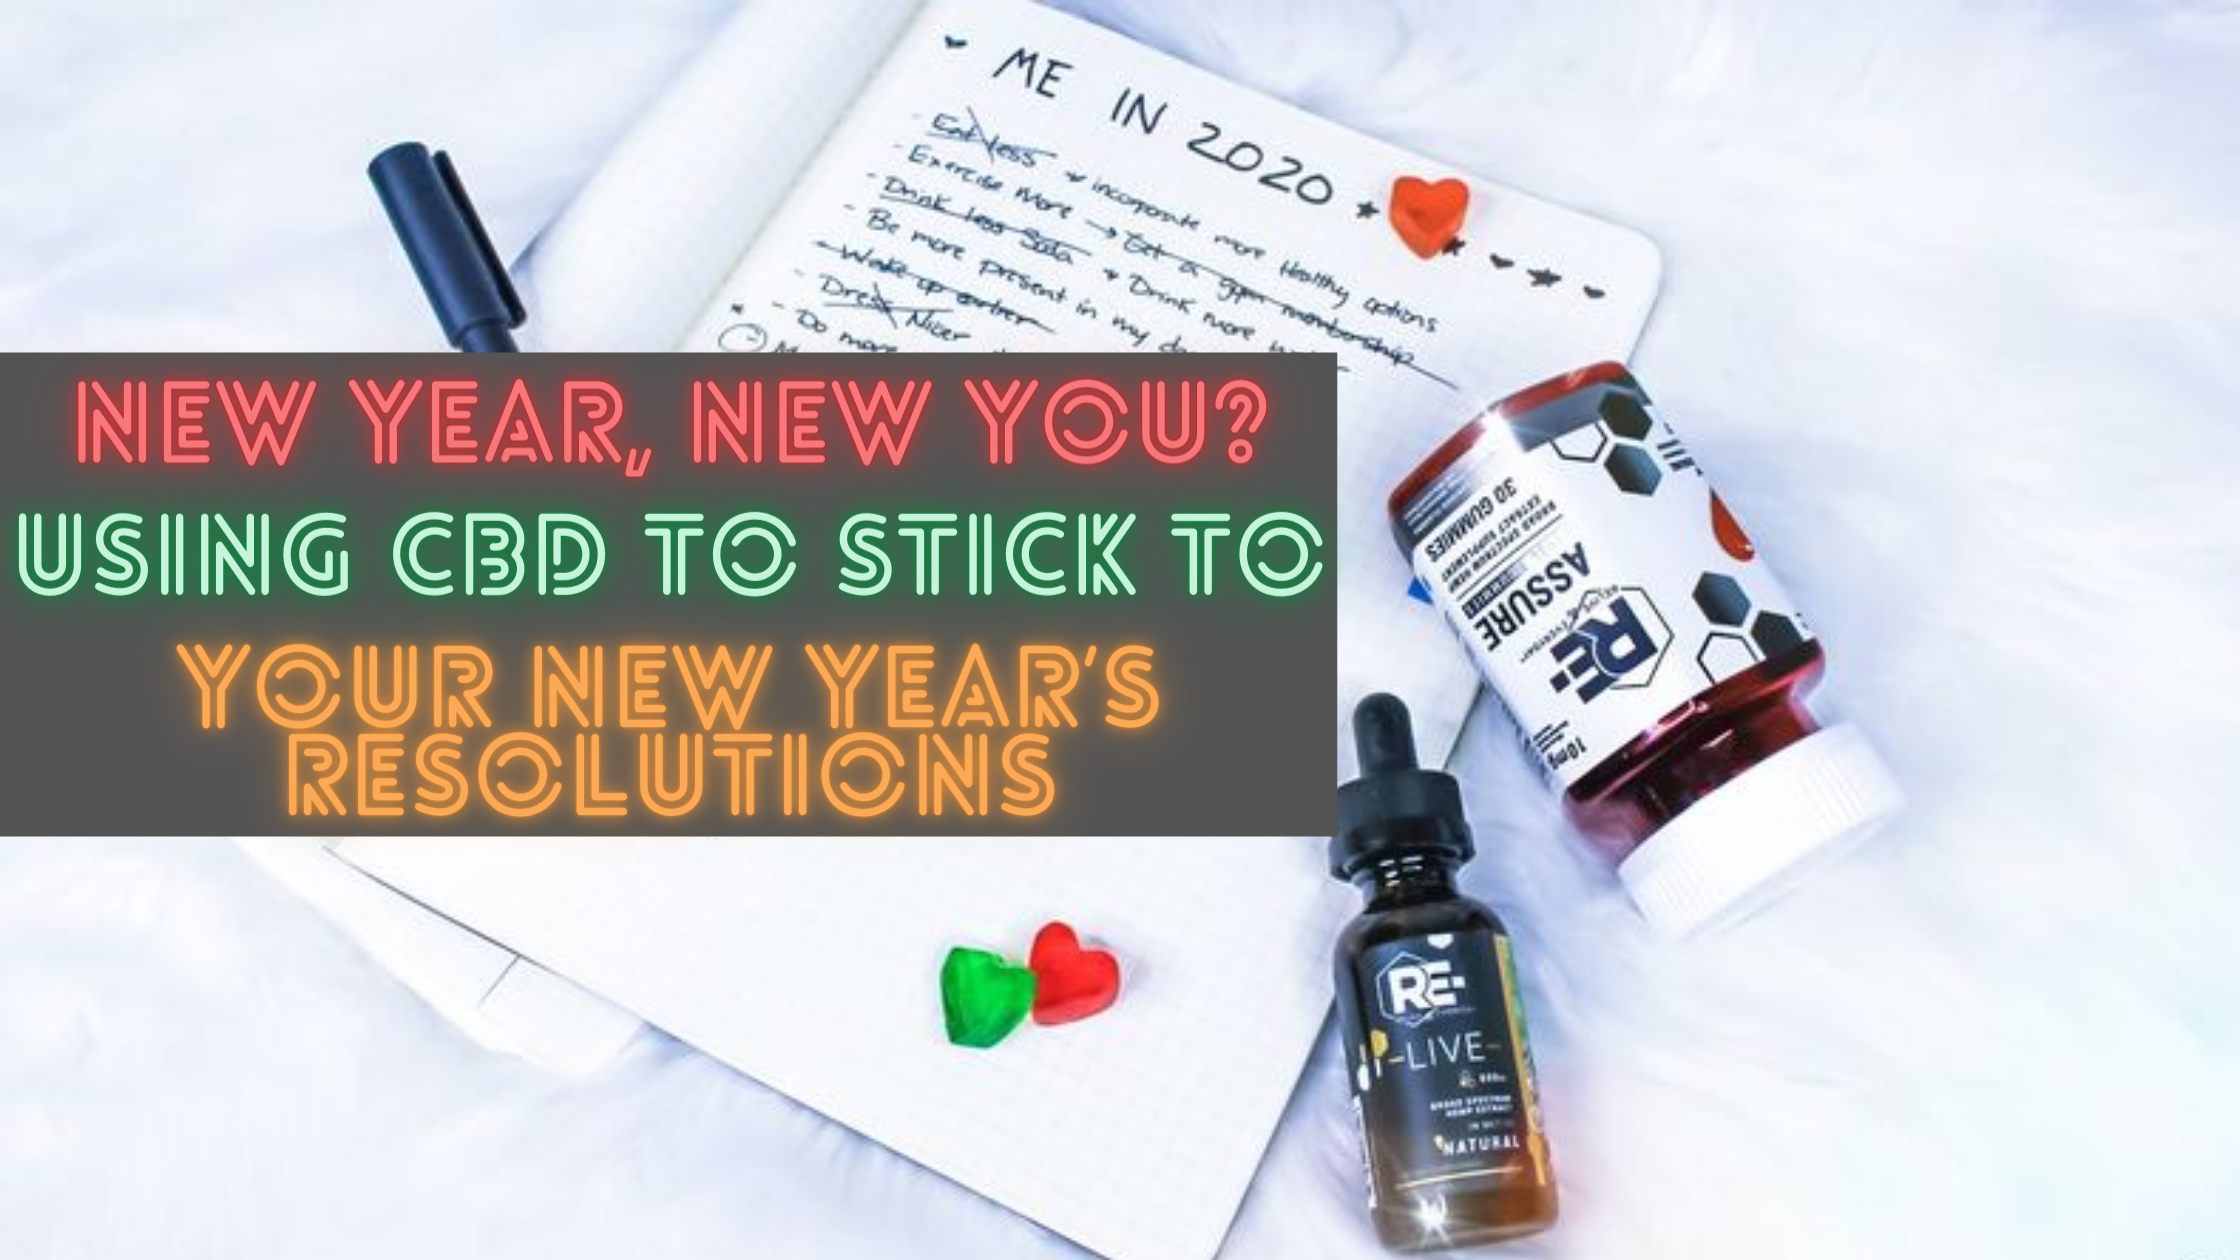 NEW YEAR, NEW YOU USING CBD TO STICK TO YOUR NEW YEAR’S RESOLUTIONS